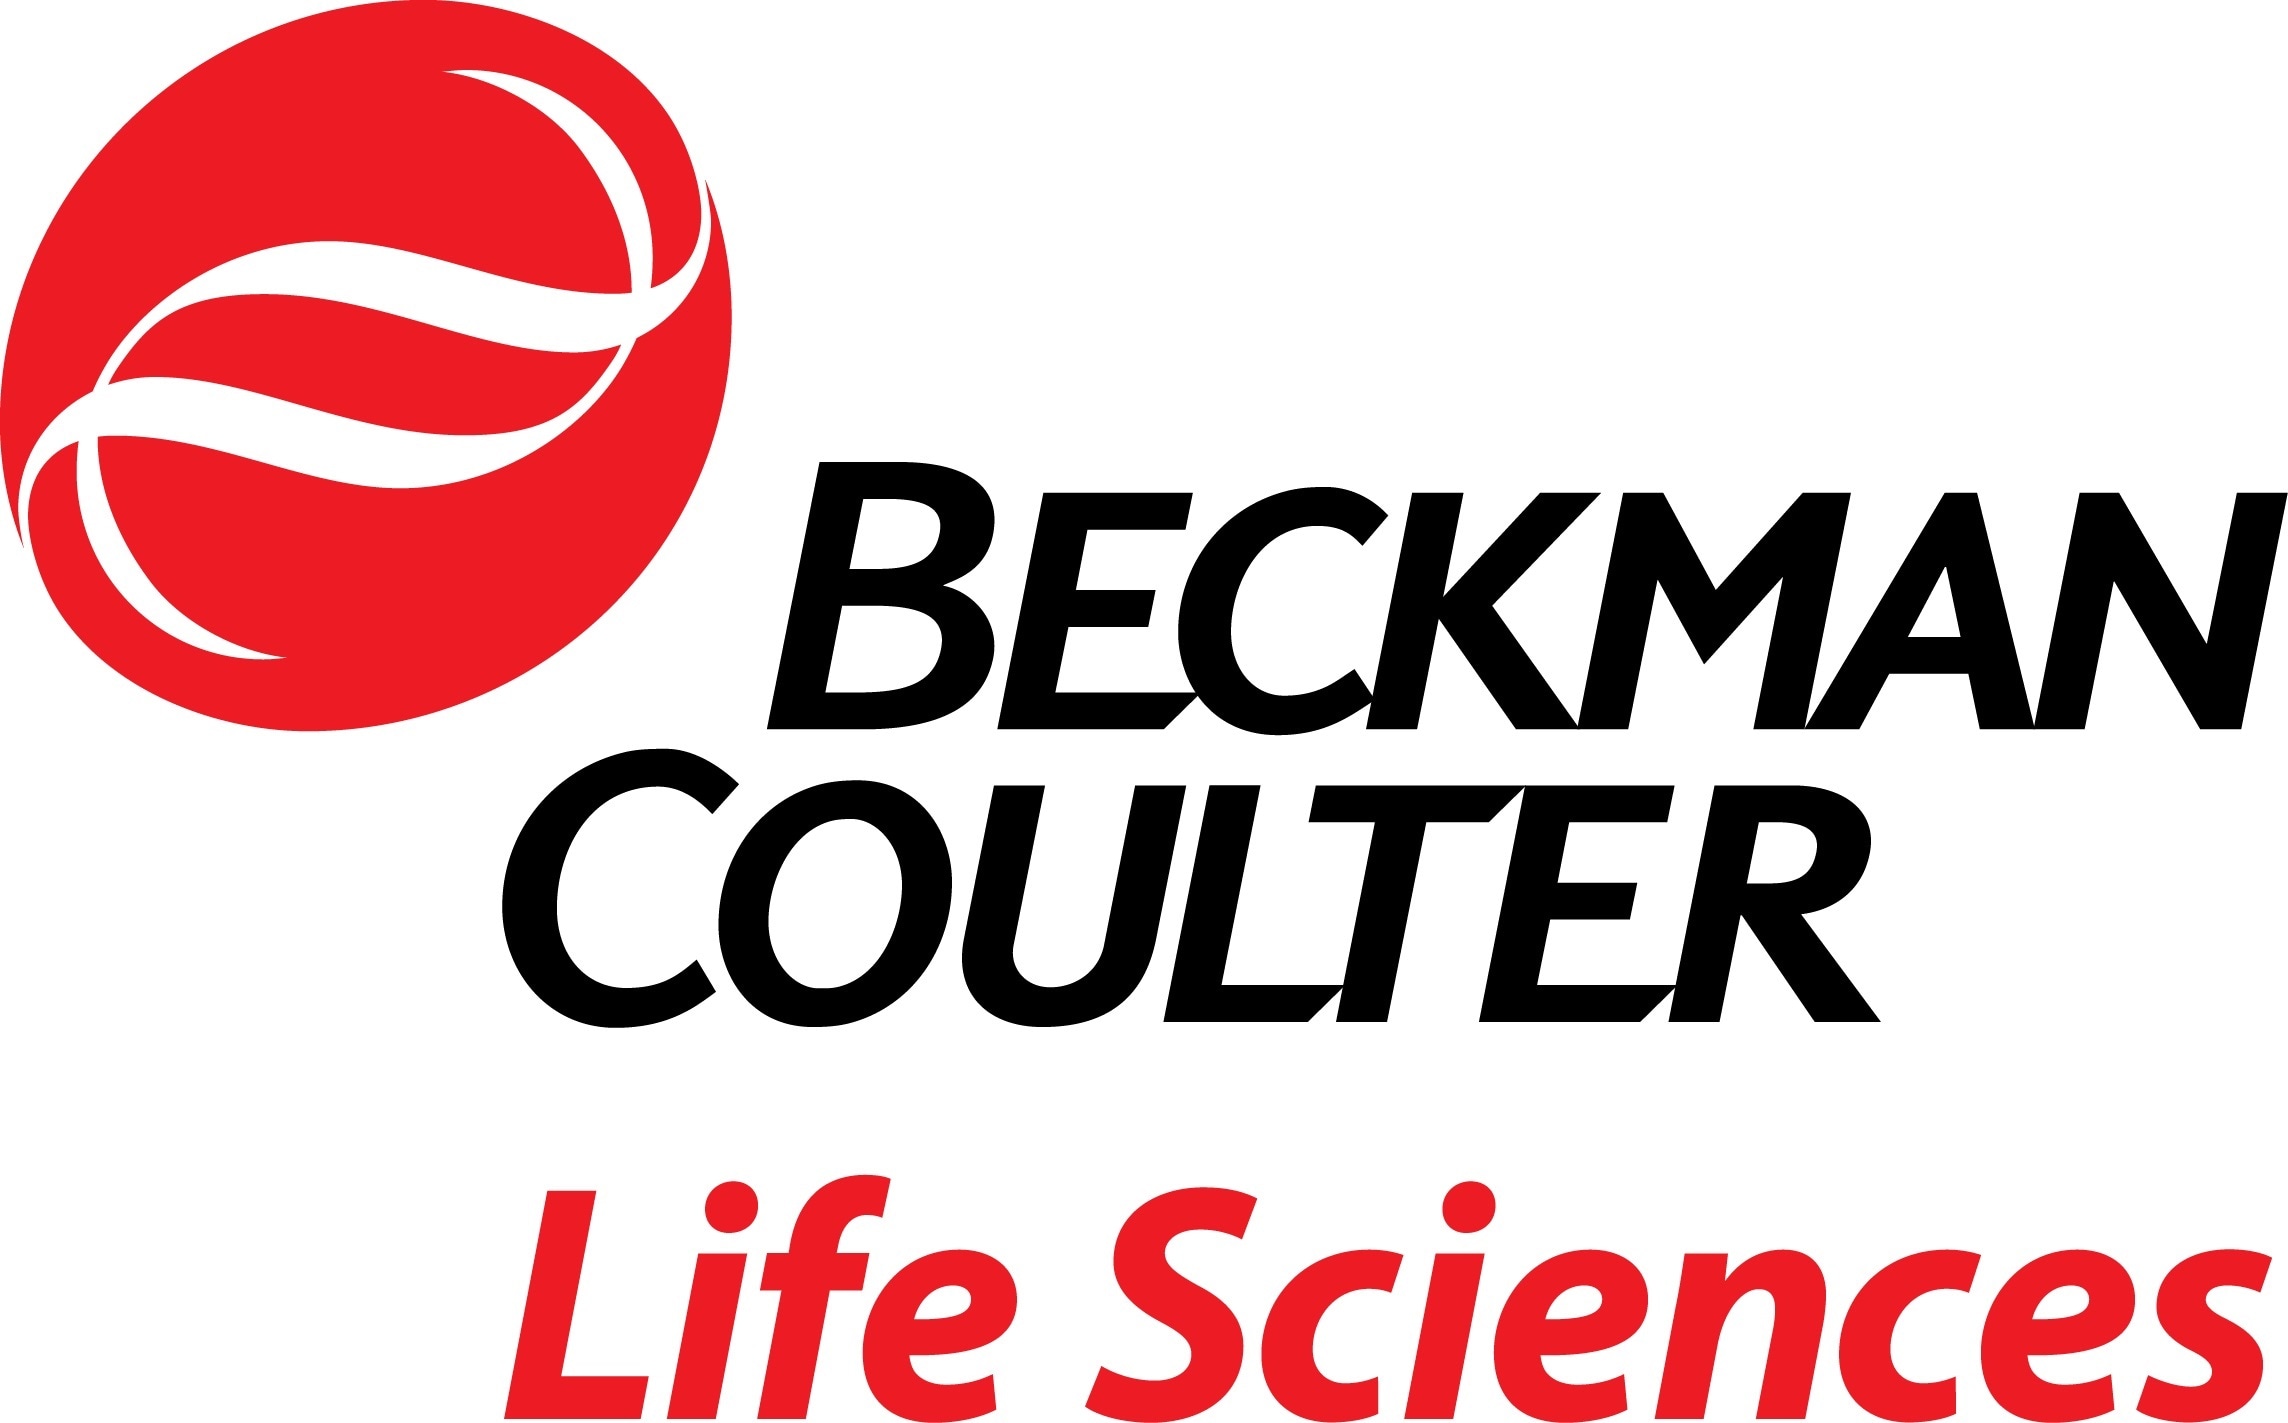 Beckman Coulter Life Sciences - Particle Counting and Characterization logo.